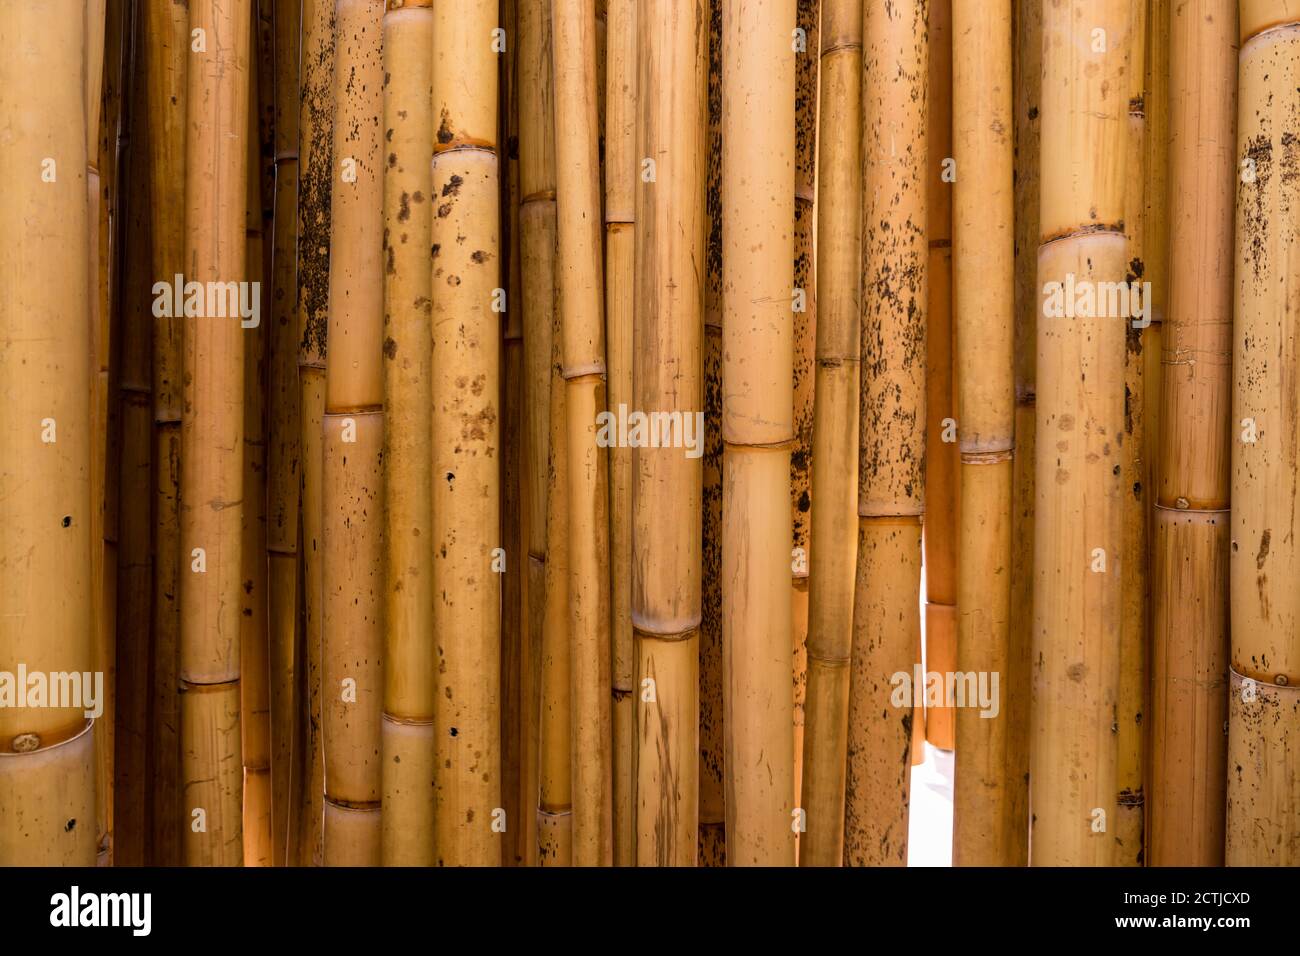 Kota Kinabalu, Sabah: BAMBOO BY THE SEA, a public art installation of 900 bamboos, working as a windchime. Created by Ar. Tressie Yap and Melissa Lo. Stock Photo